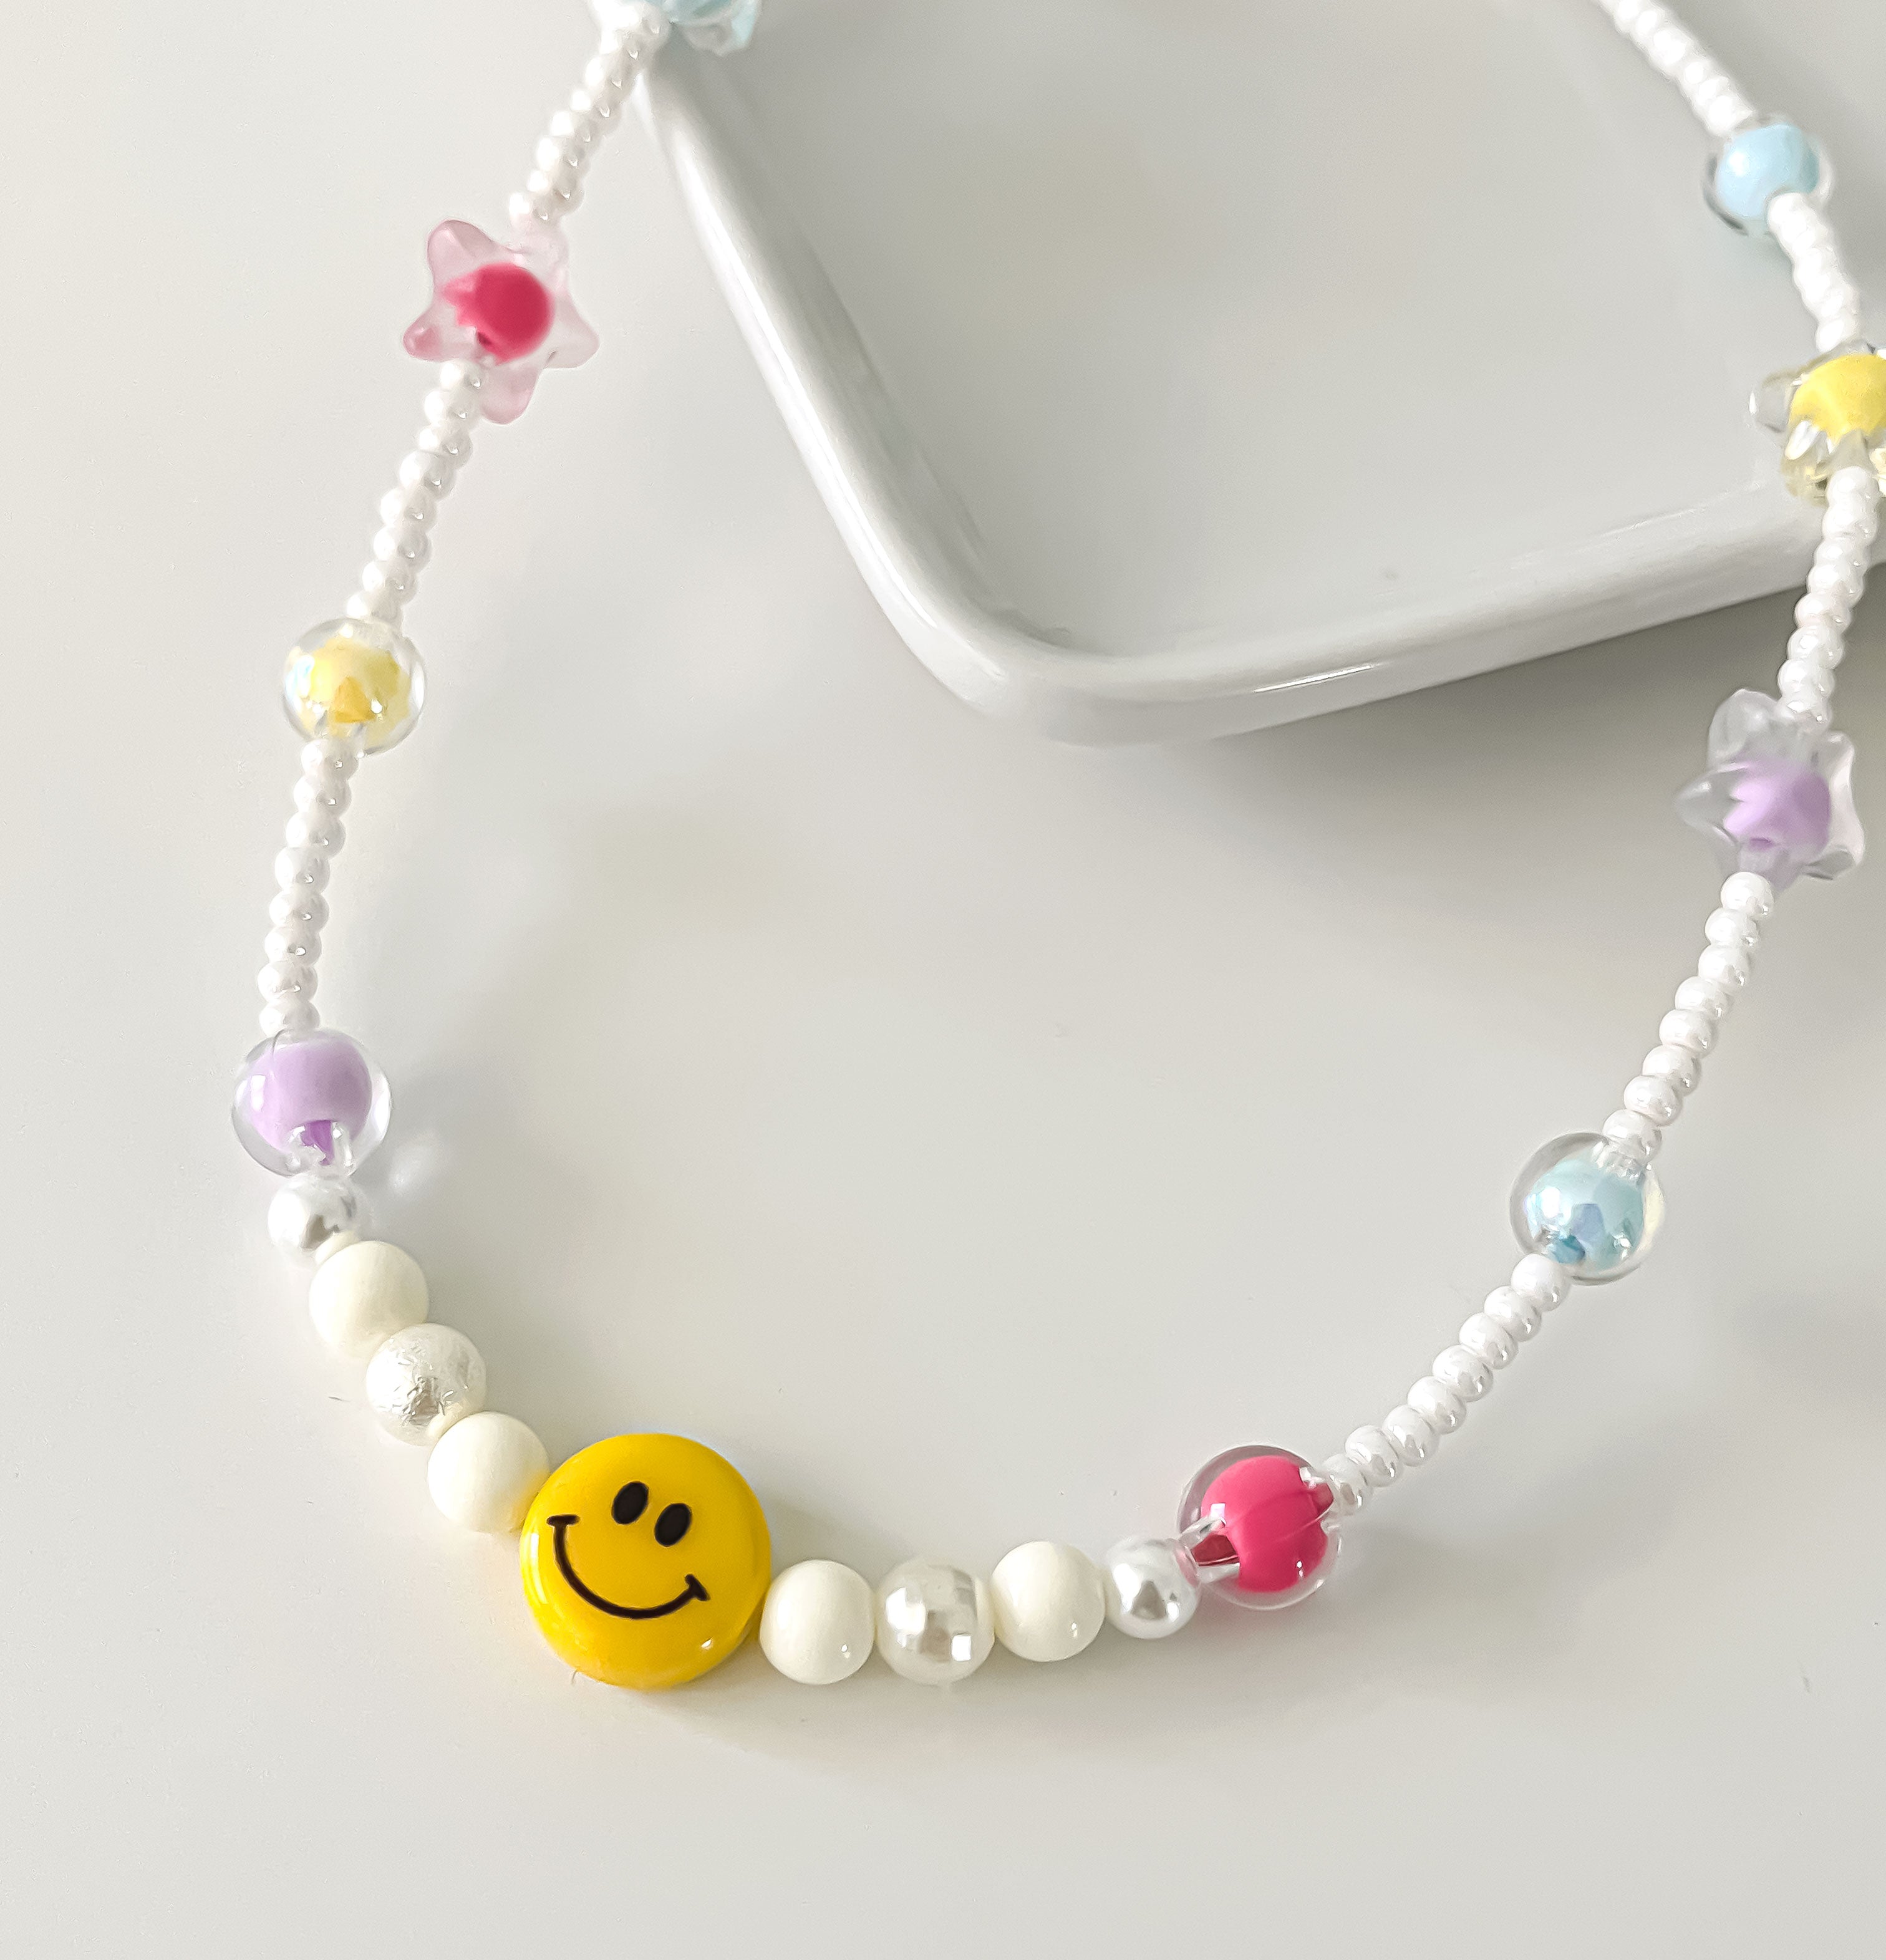 Buy Y2k Jewelry Beaded Necklace Fashion Smiley Face Necklace for Teen Girls  & Women,Cute Colorful Necklaces Aesthetic - Handmade Beaded /Soft Pottery  /Choker Set, c, Created Pearl, at Amazon.in